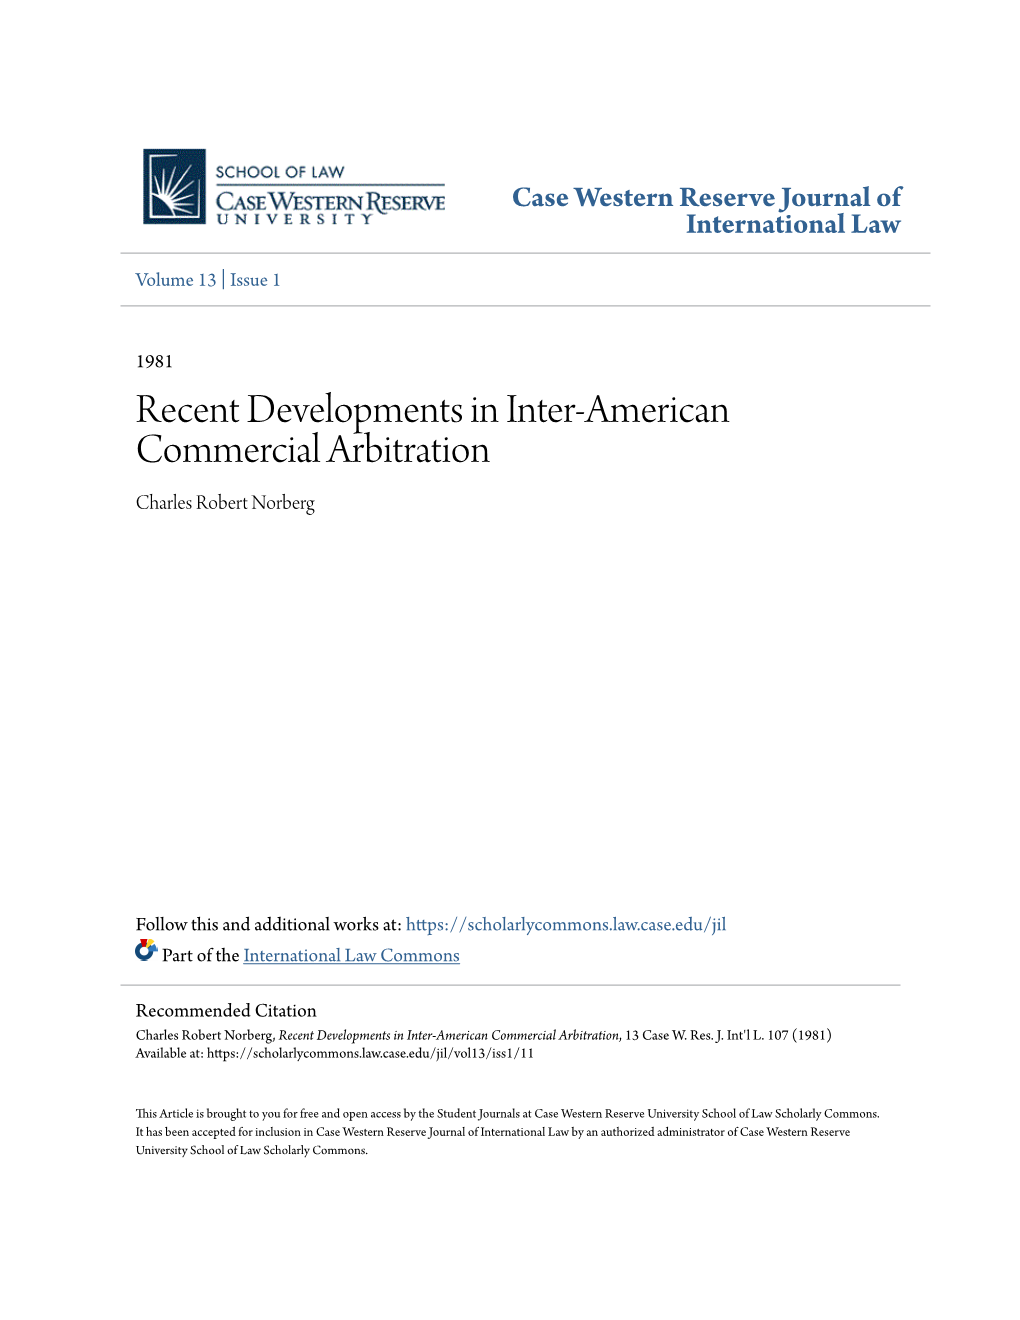 Recent Developments in Inter-American Commercial Arbitration Charles Robert Norberg